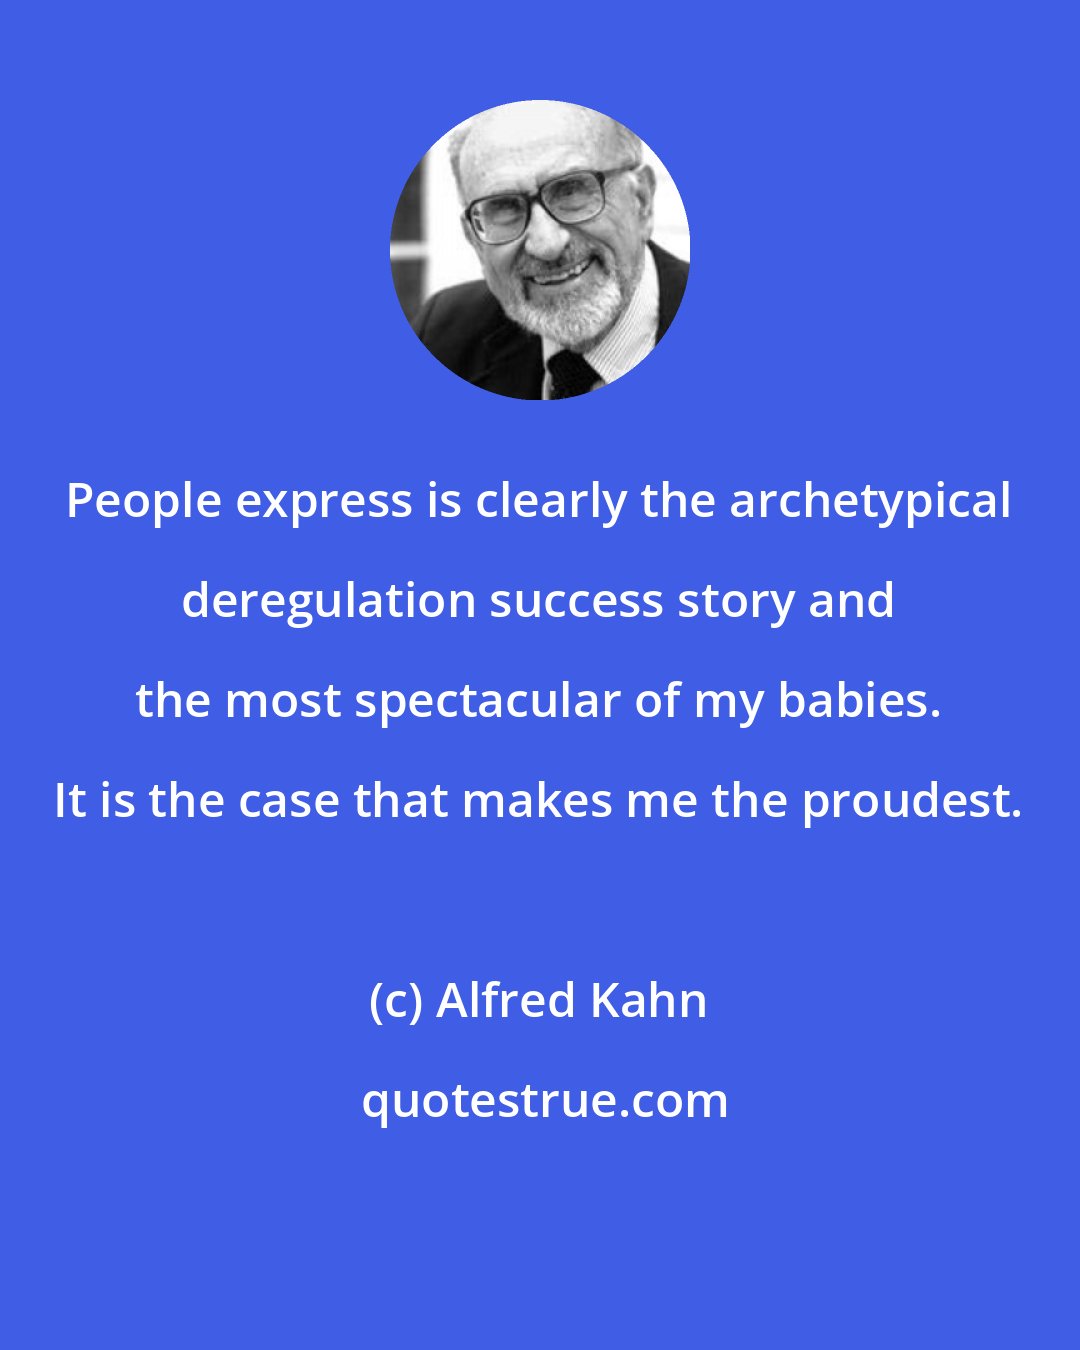 Alfred Kahn: People express is clearly the archetypical deregulation success story and the most spectacular of my babies. It is the case that makes me the proudest.